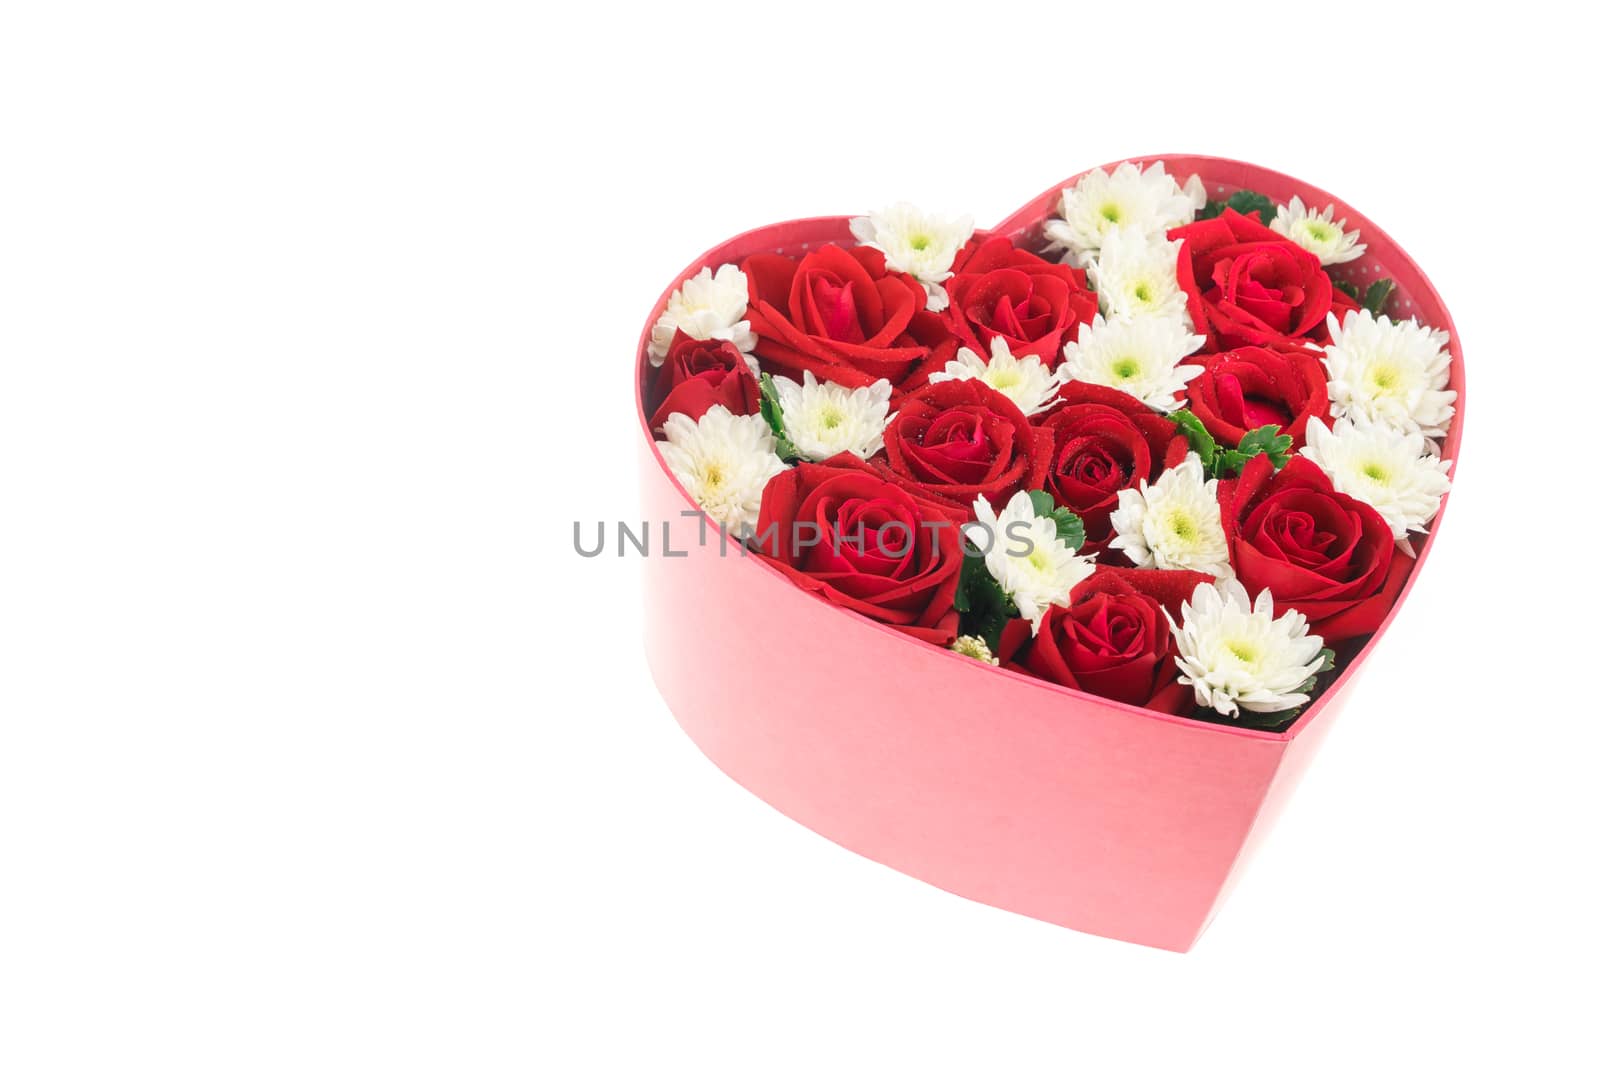 Roses and carnations held in the heart shape box. gift for valentine 's day, isolated on white background